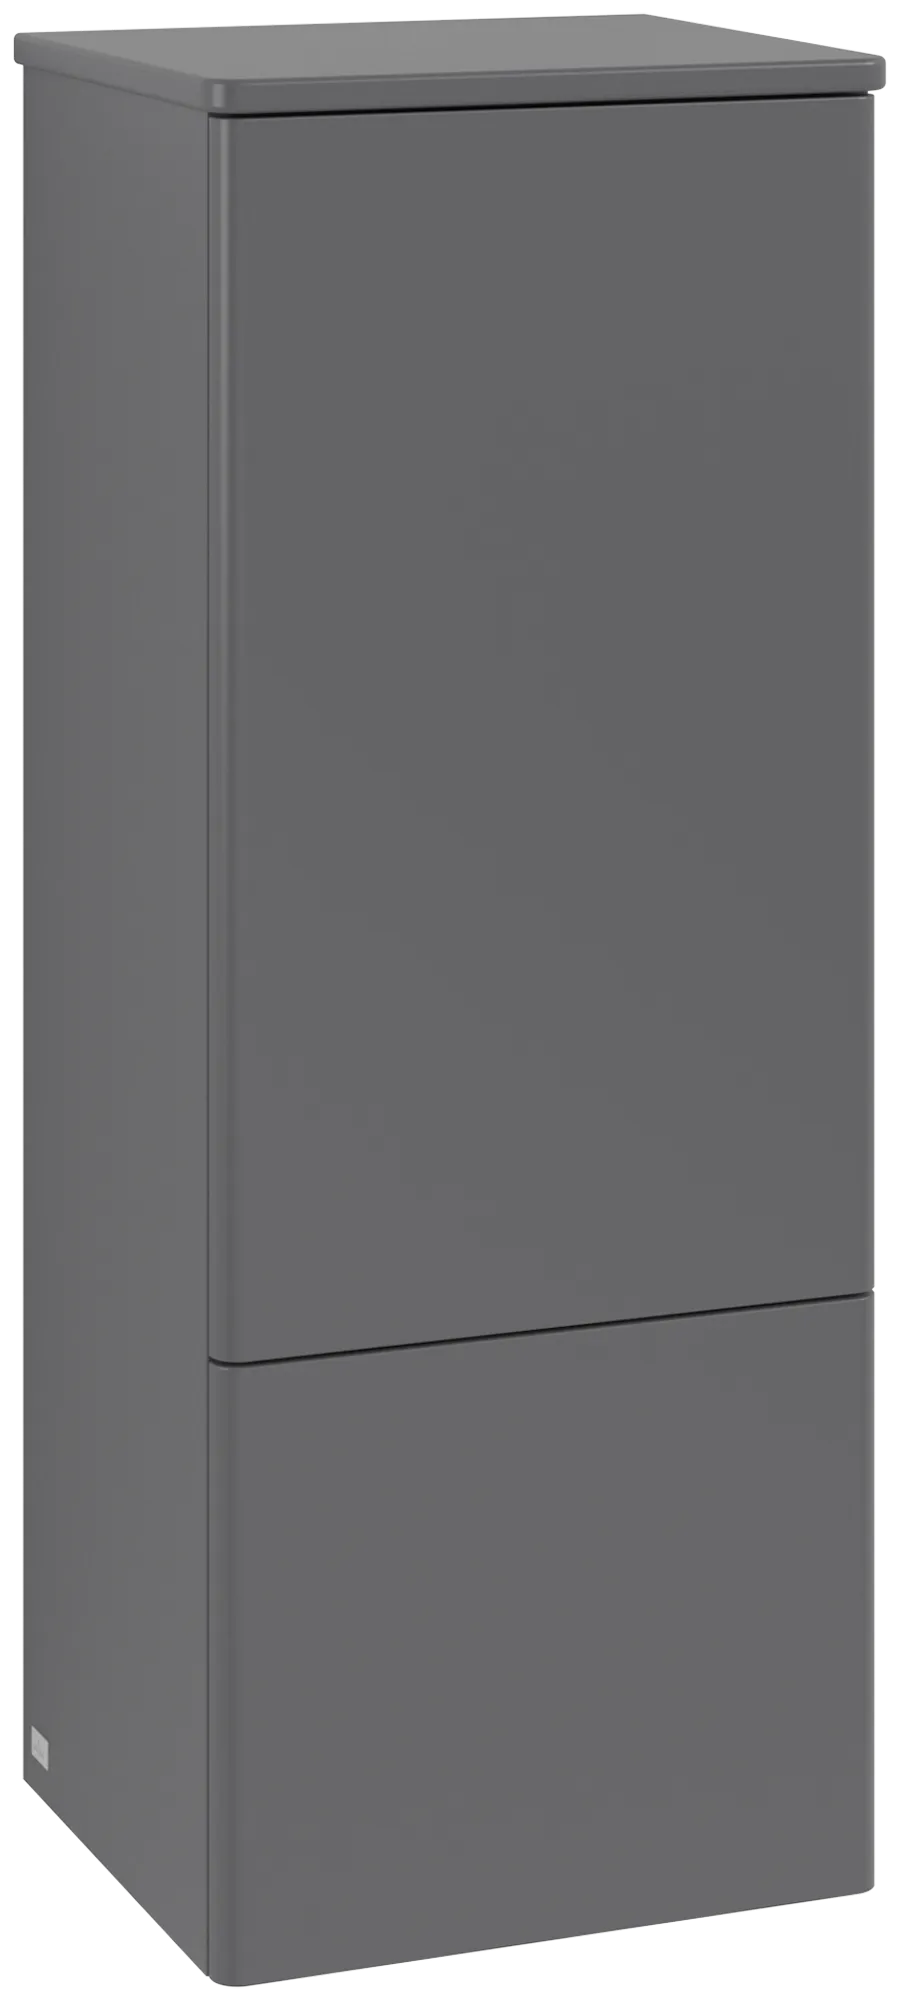 Picture of VILLEROY BOCH Antao Medium-height cabinet, 1 door, 414 x 1039 x 356 mm, Front without structure, Anthracite Matt Lacquer / Anthracite Matt Lacquer #K44000GK